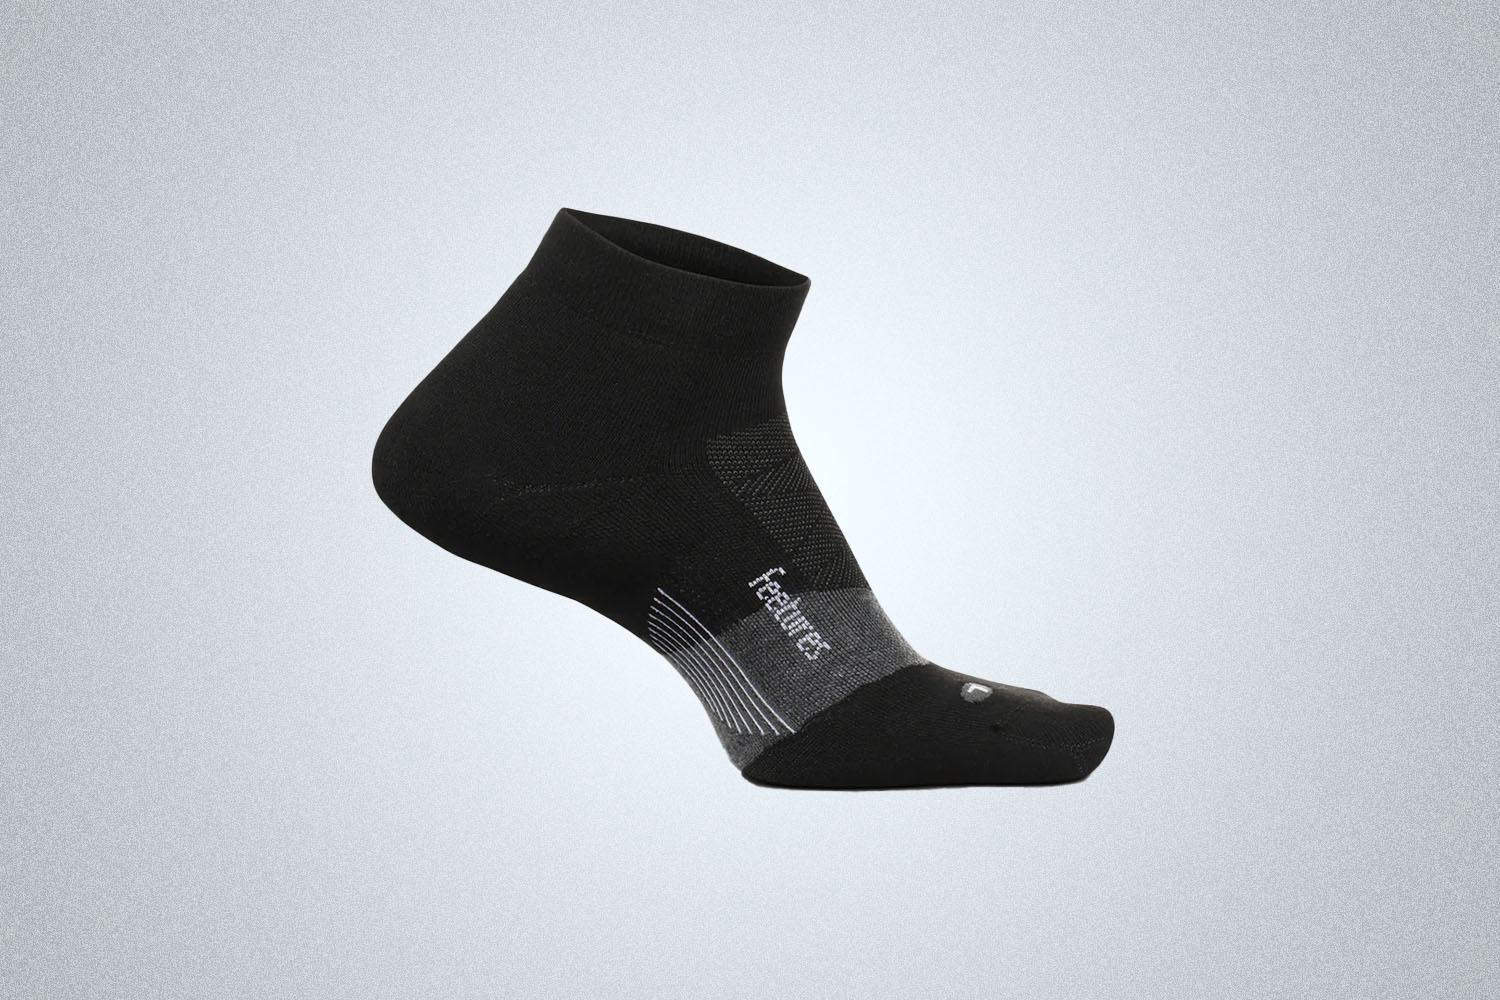 The Feetures Elite Golf Max Cushion Socks on a gray background